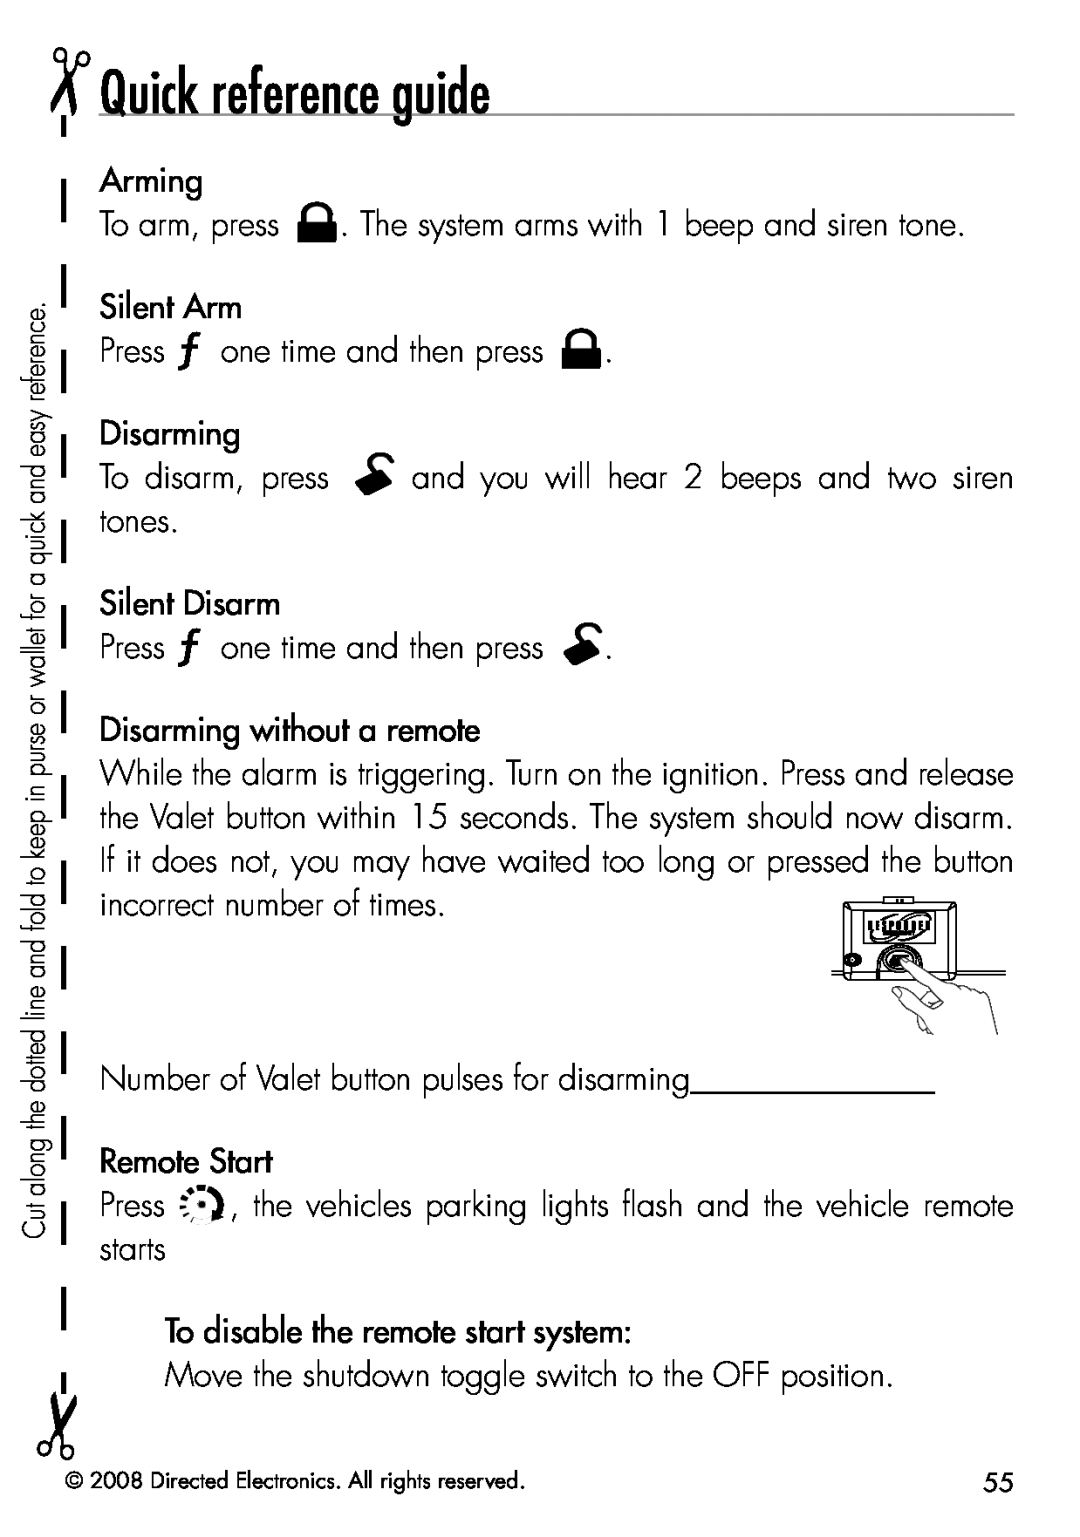 Viper 5901 manual Quick reference guide, Arming To arm, press . The system arms with 1 beep and siren tone 